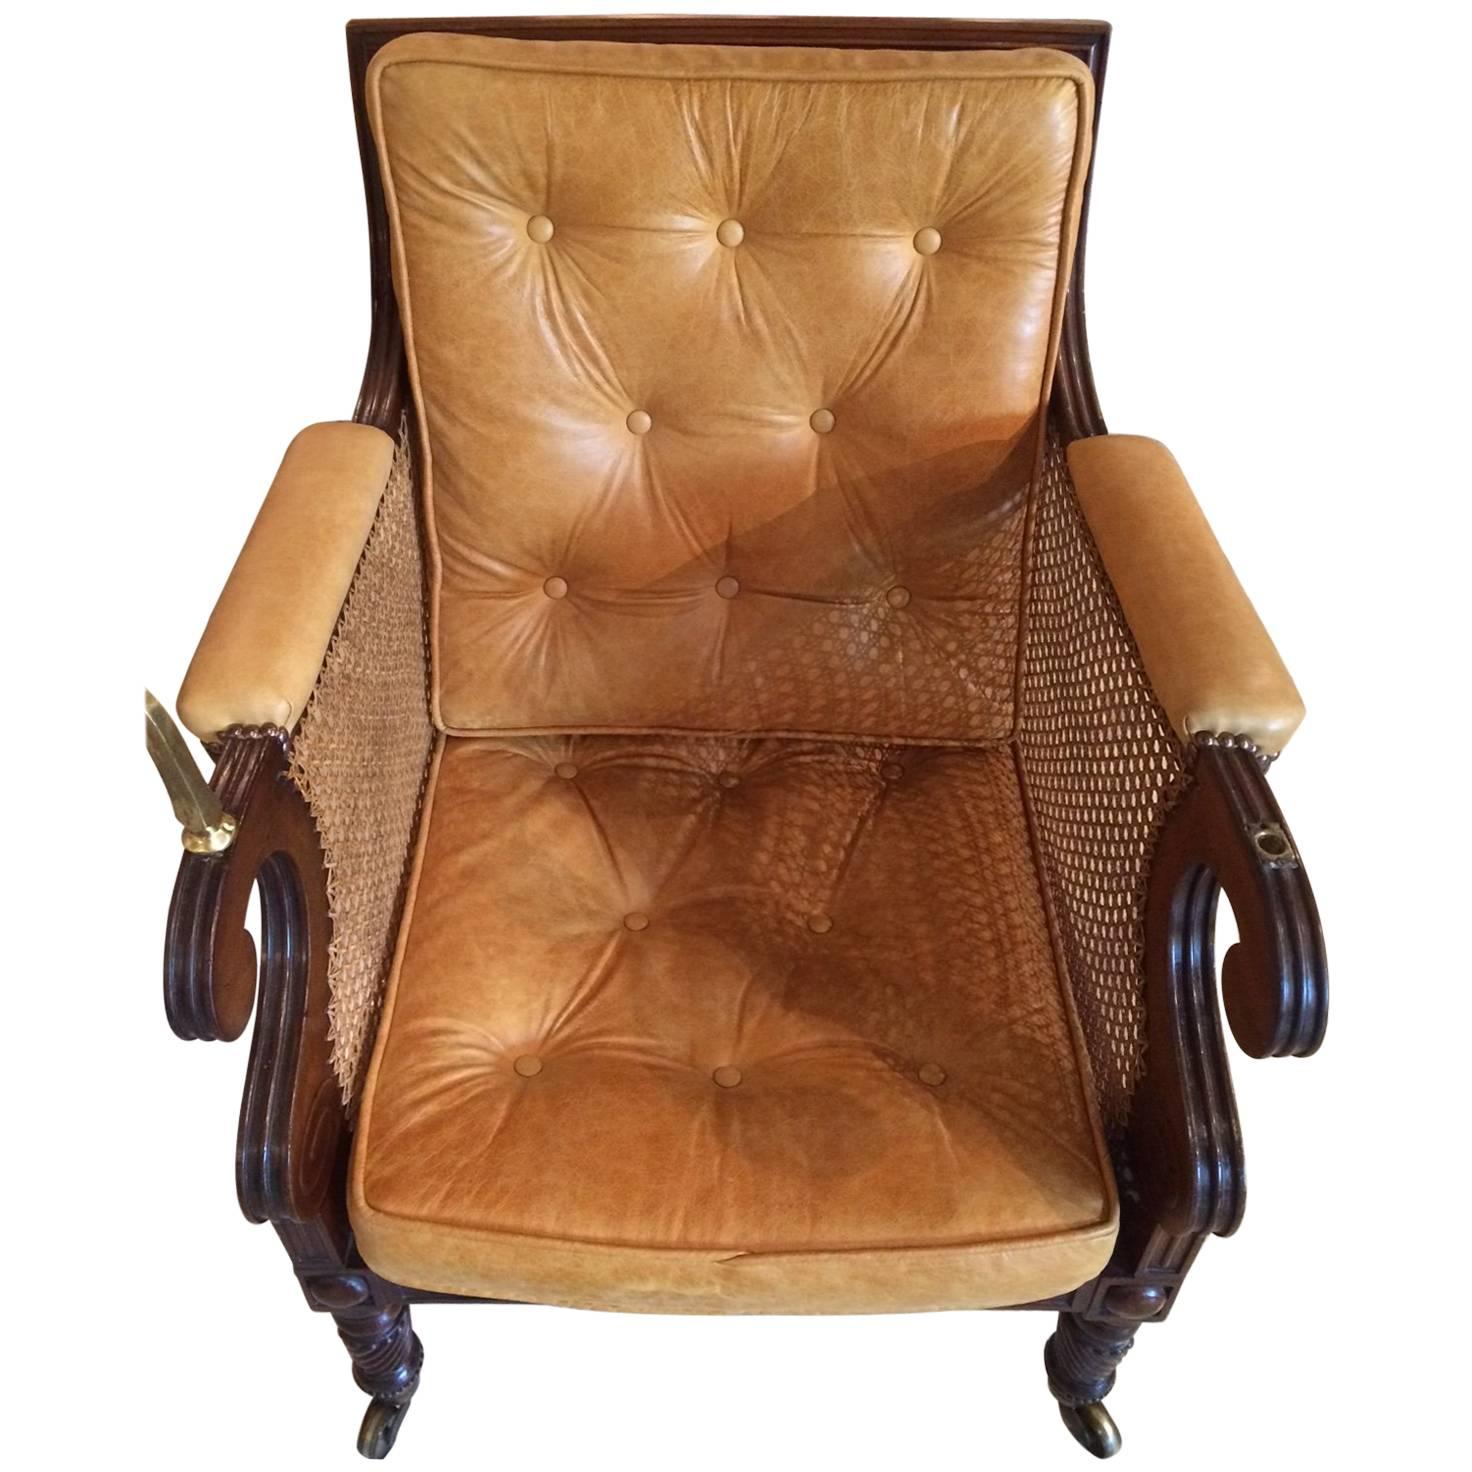 Stunning Regency Period Mahogany Bergere Chair For Sale